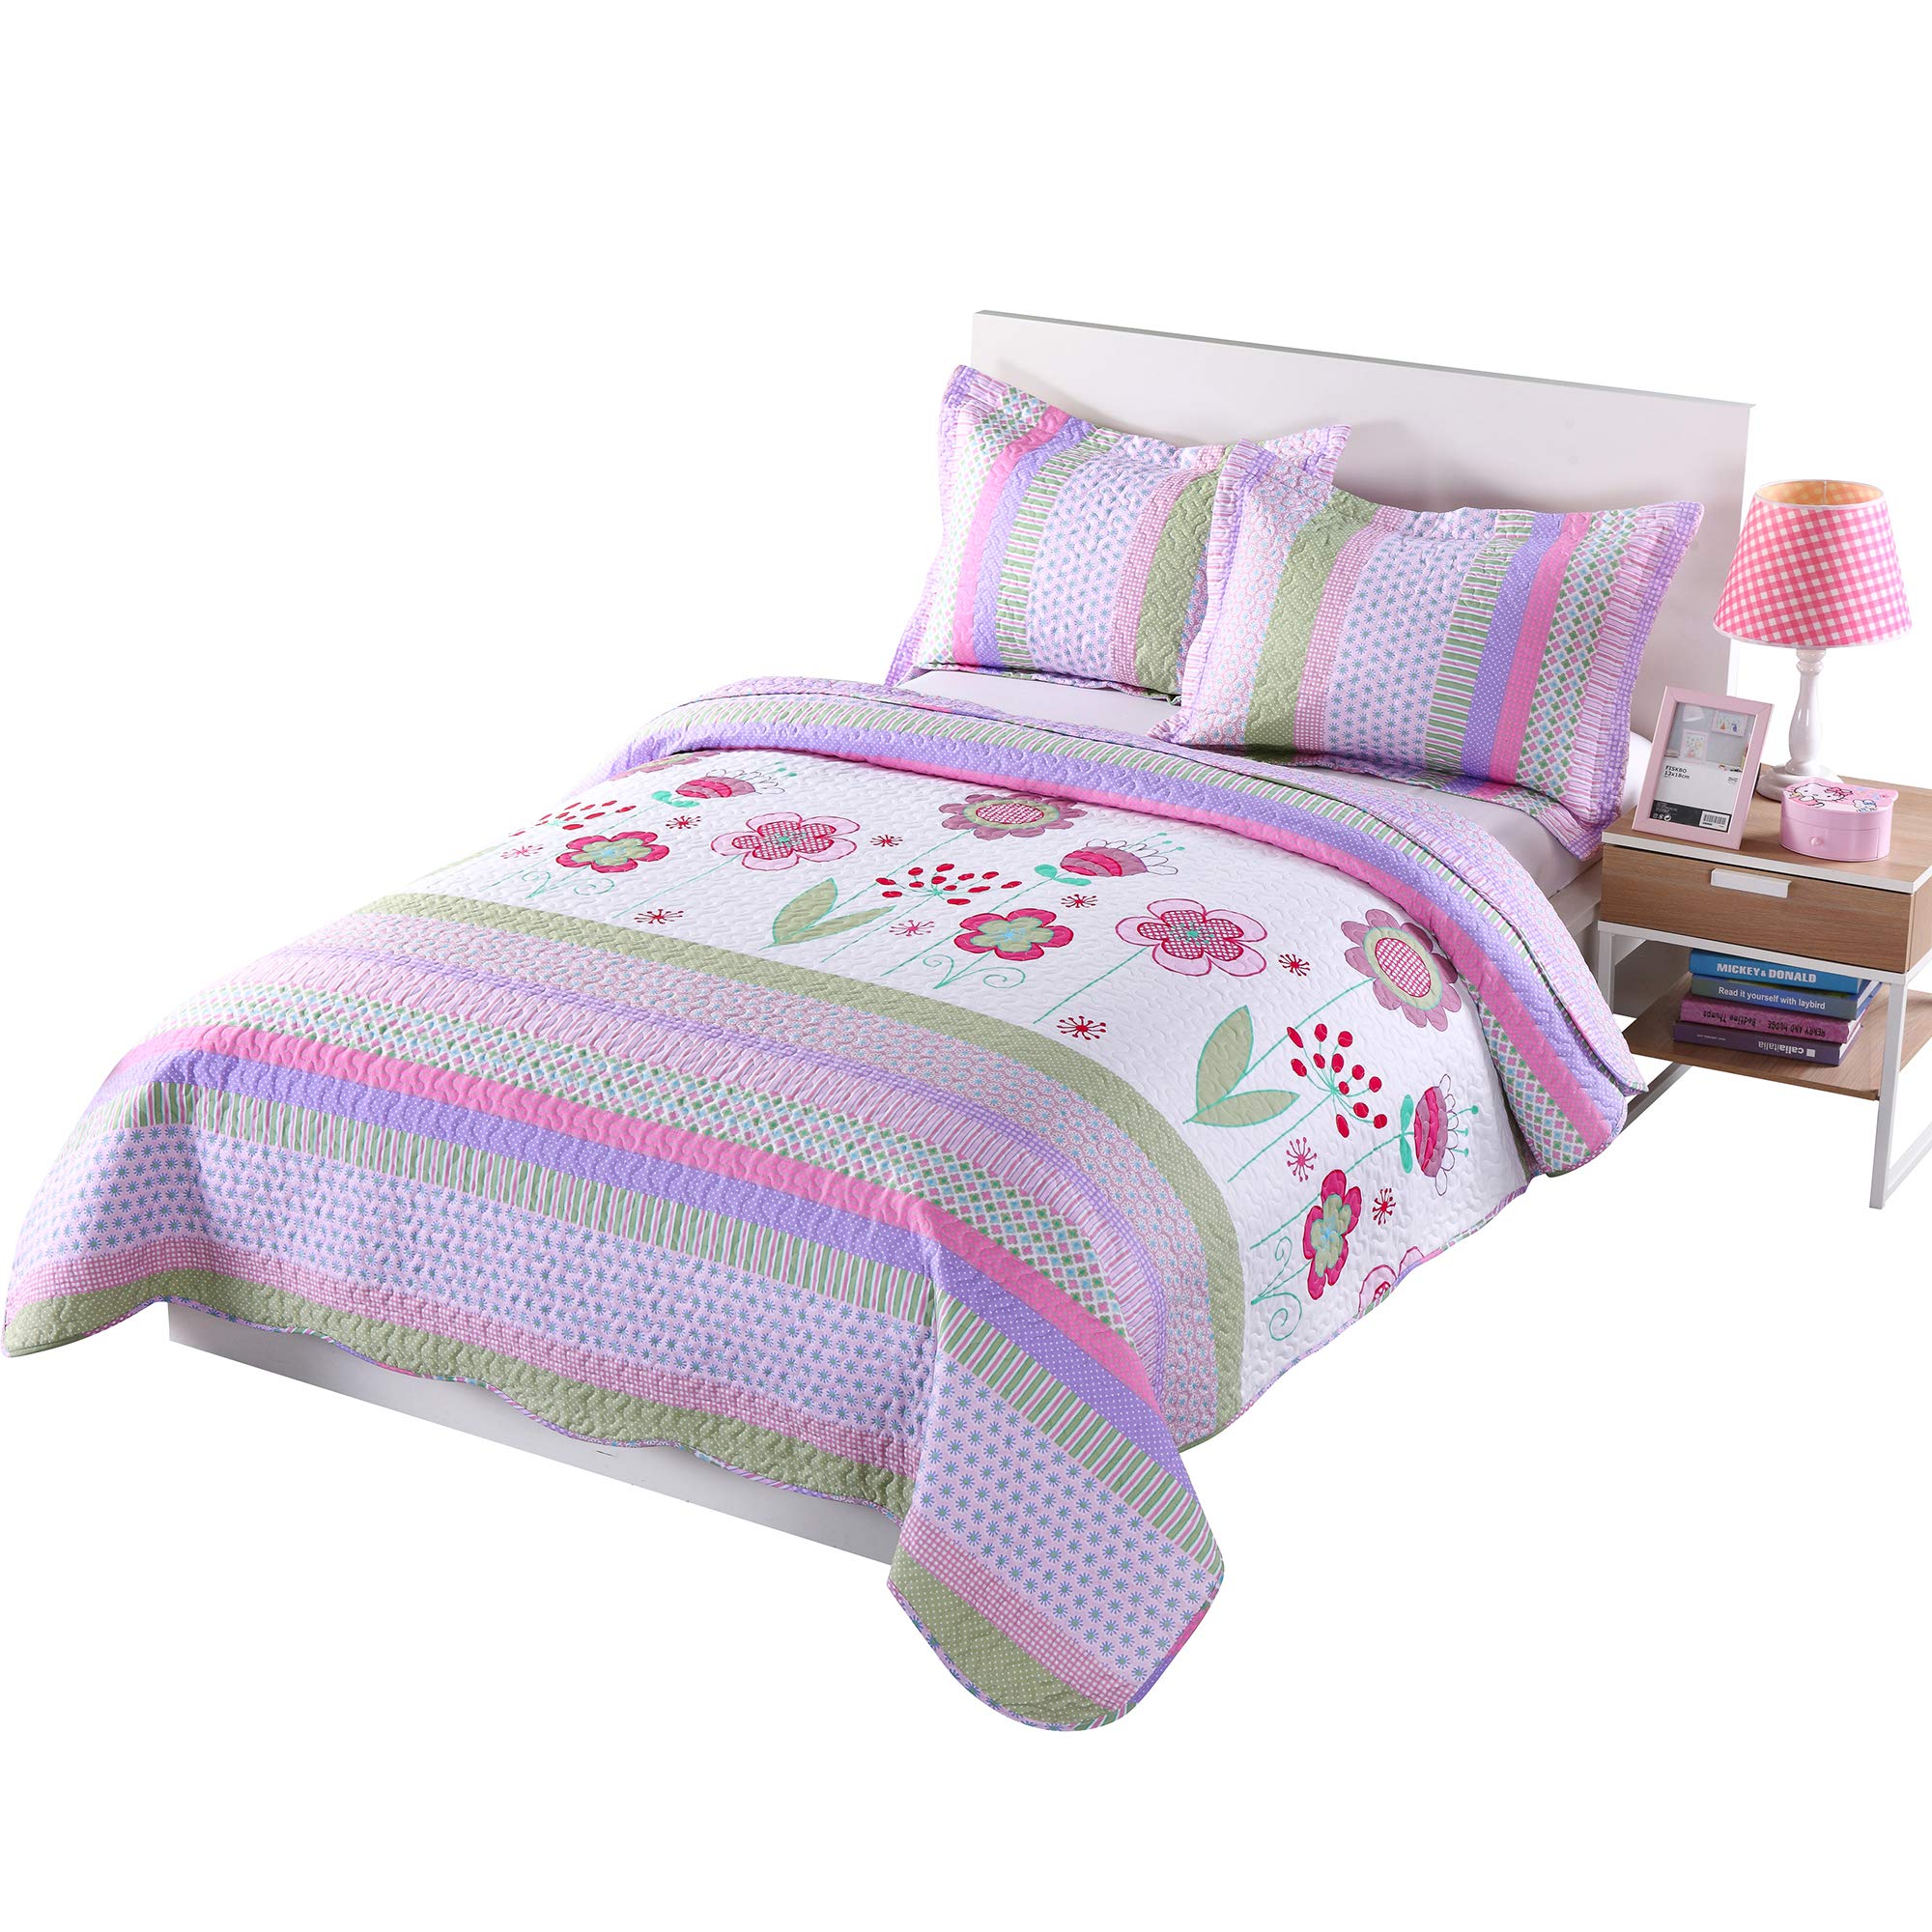 Book Cover MarCielo 3 Piece Kids Bedspread Quilts Set Throw Blanket for Teens Girls Bed Printed Bedding Coverlet, Full Size, Purple Floral Striped (Full)